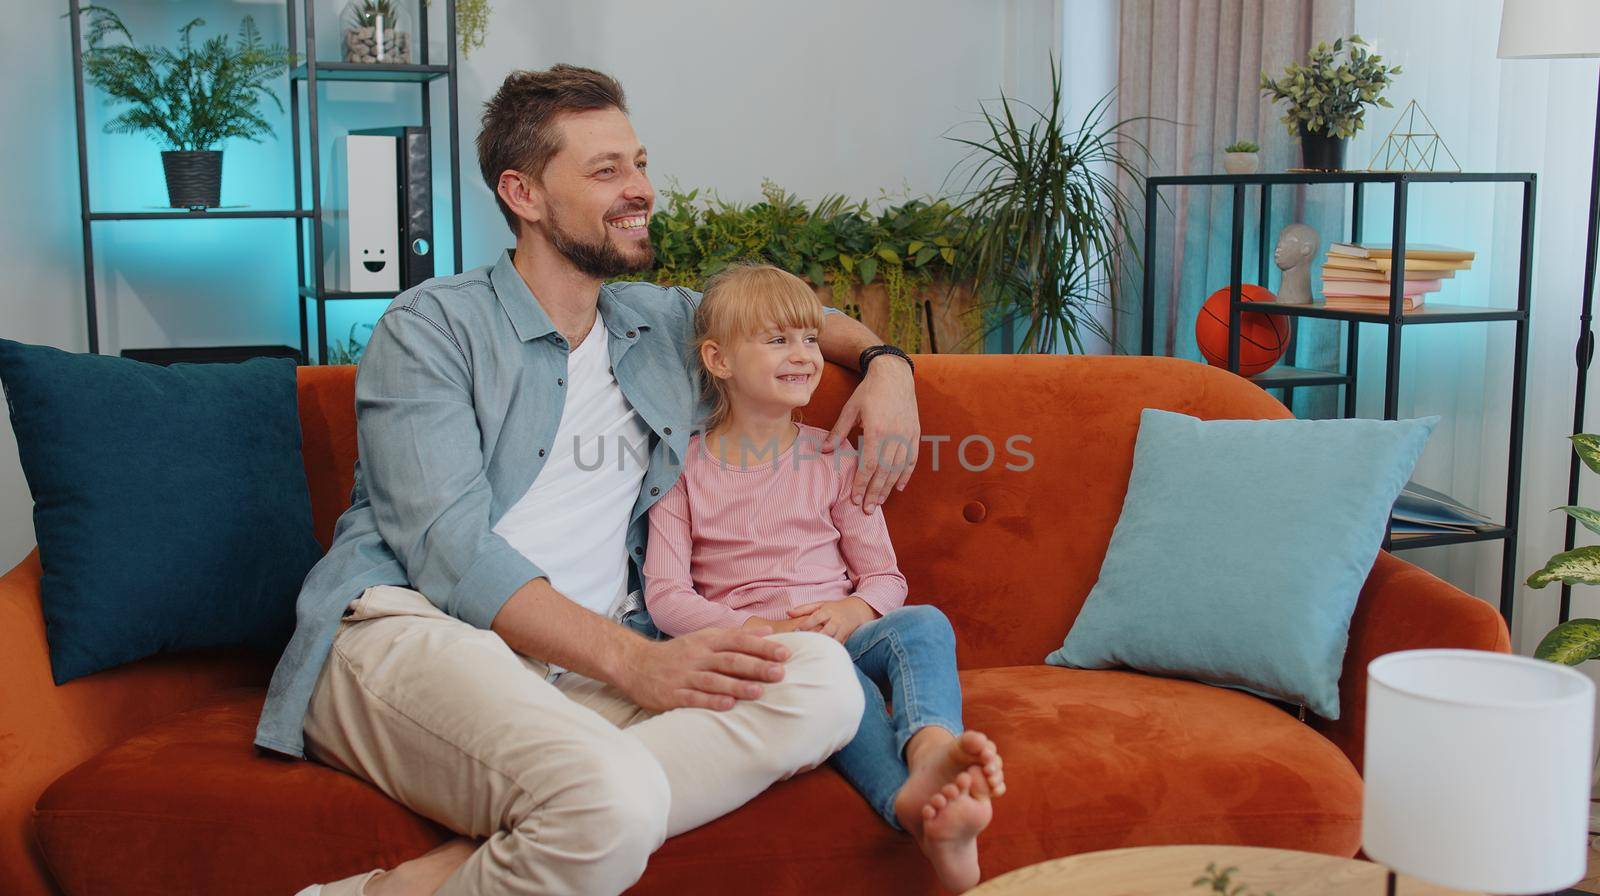 Young loving man dad talking to little 7s daughter toddler together on couch at home. Preschool kid and father having warm trustworthy conversation, good relation. Understanding, family bond concept